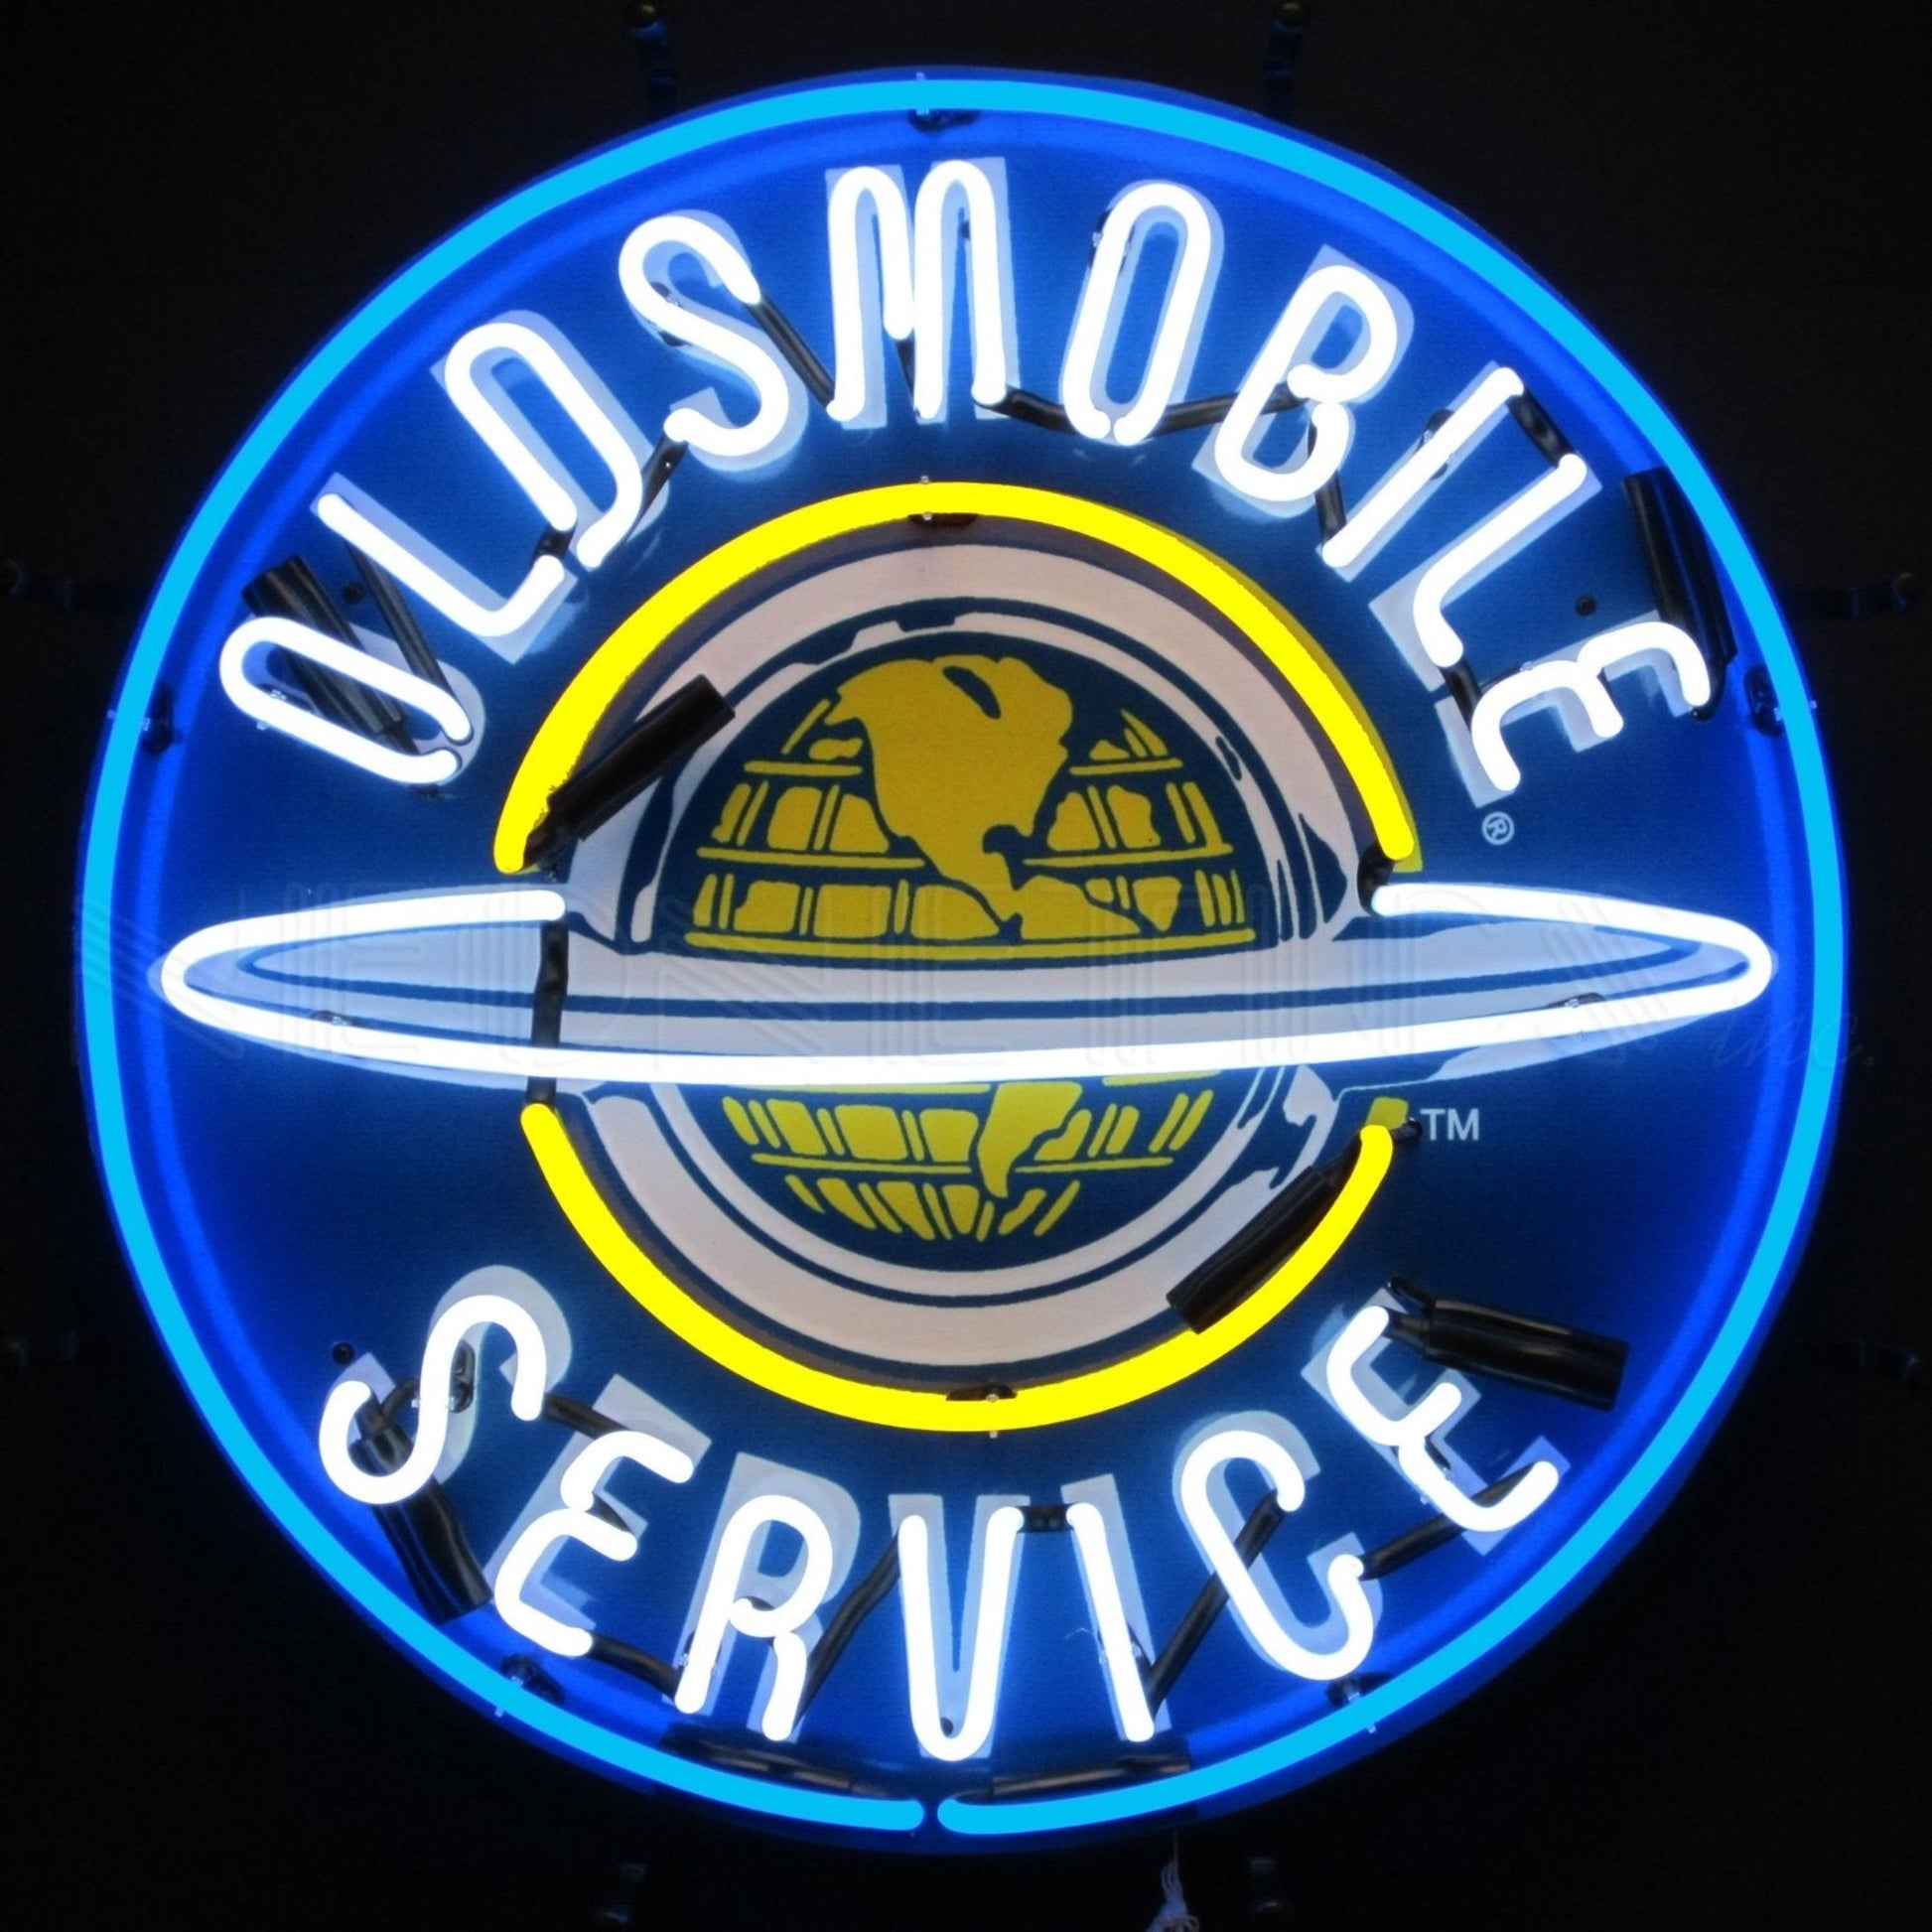 "Oldsmobile Service" circular neon sign with logo in blue and yellow.